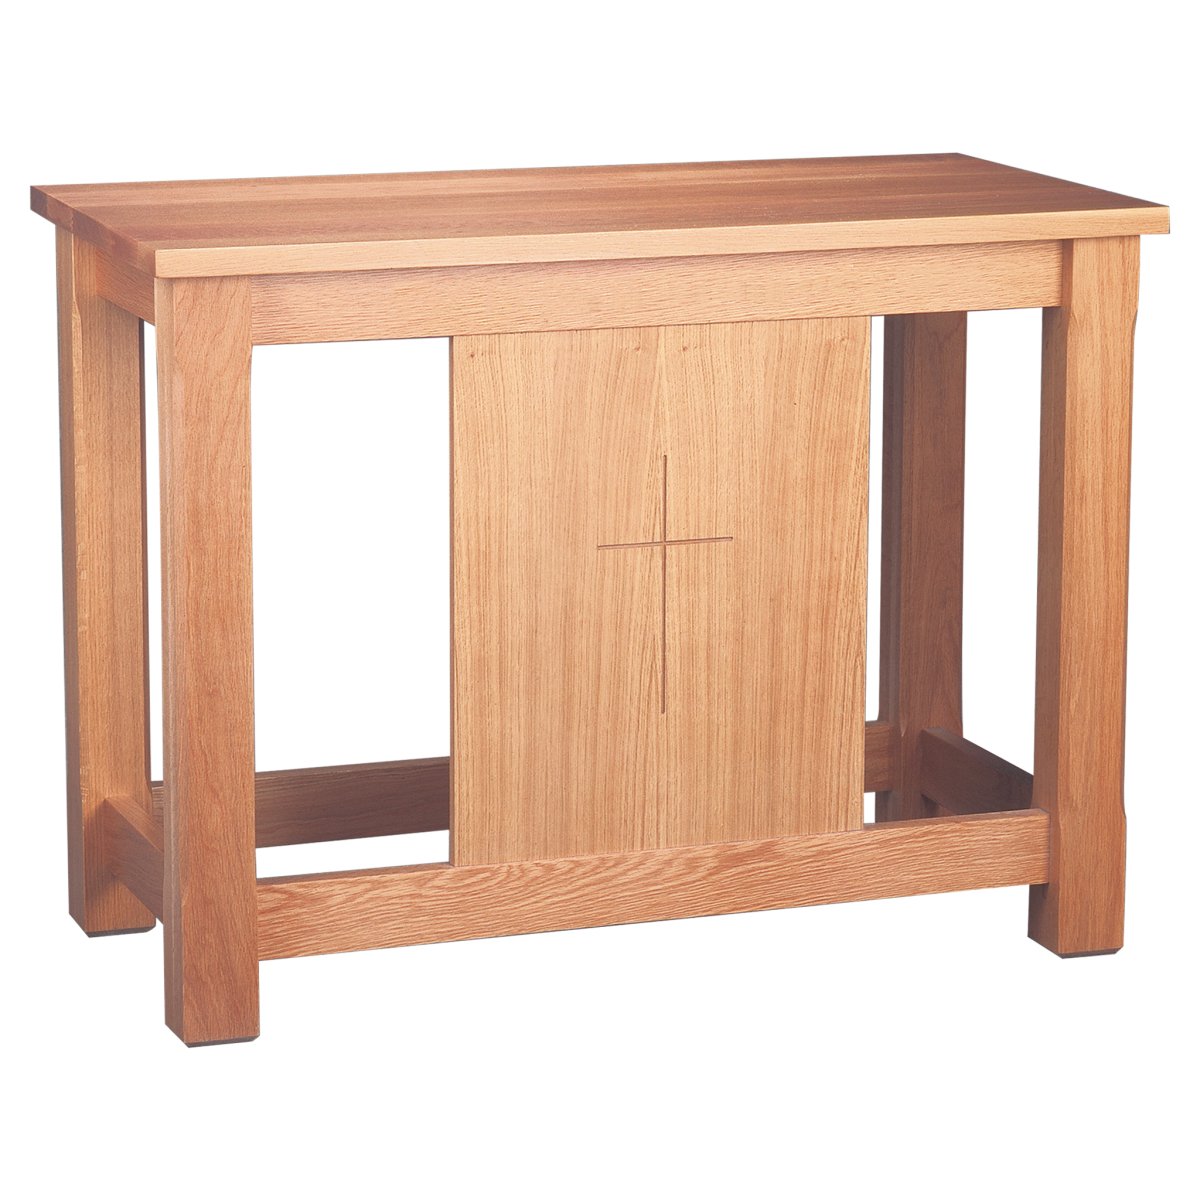 Incised Cross Panel Communion Table - Hayes & Finch